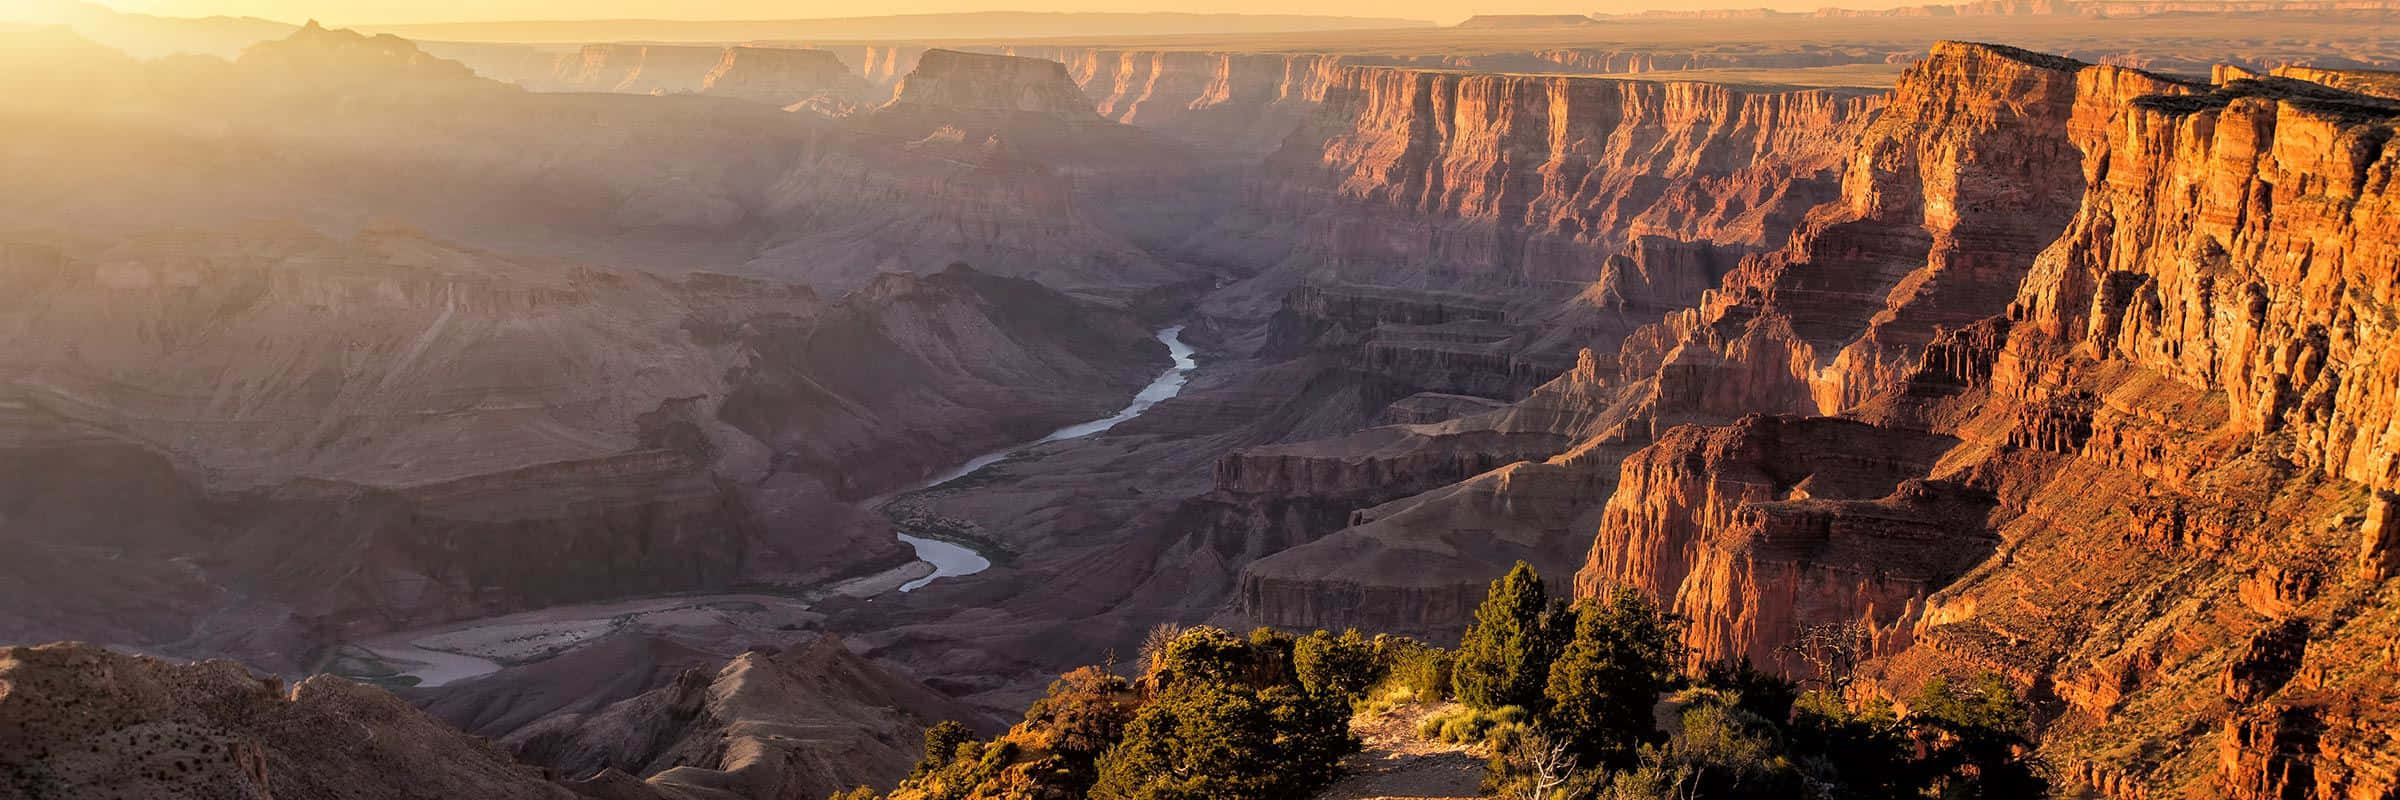 The beautiful, rugged landscape of the Grand Canyon